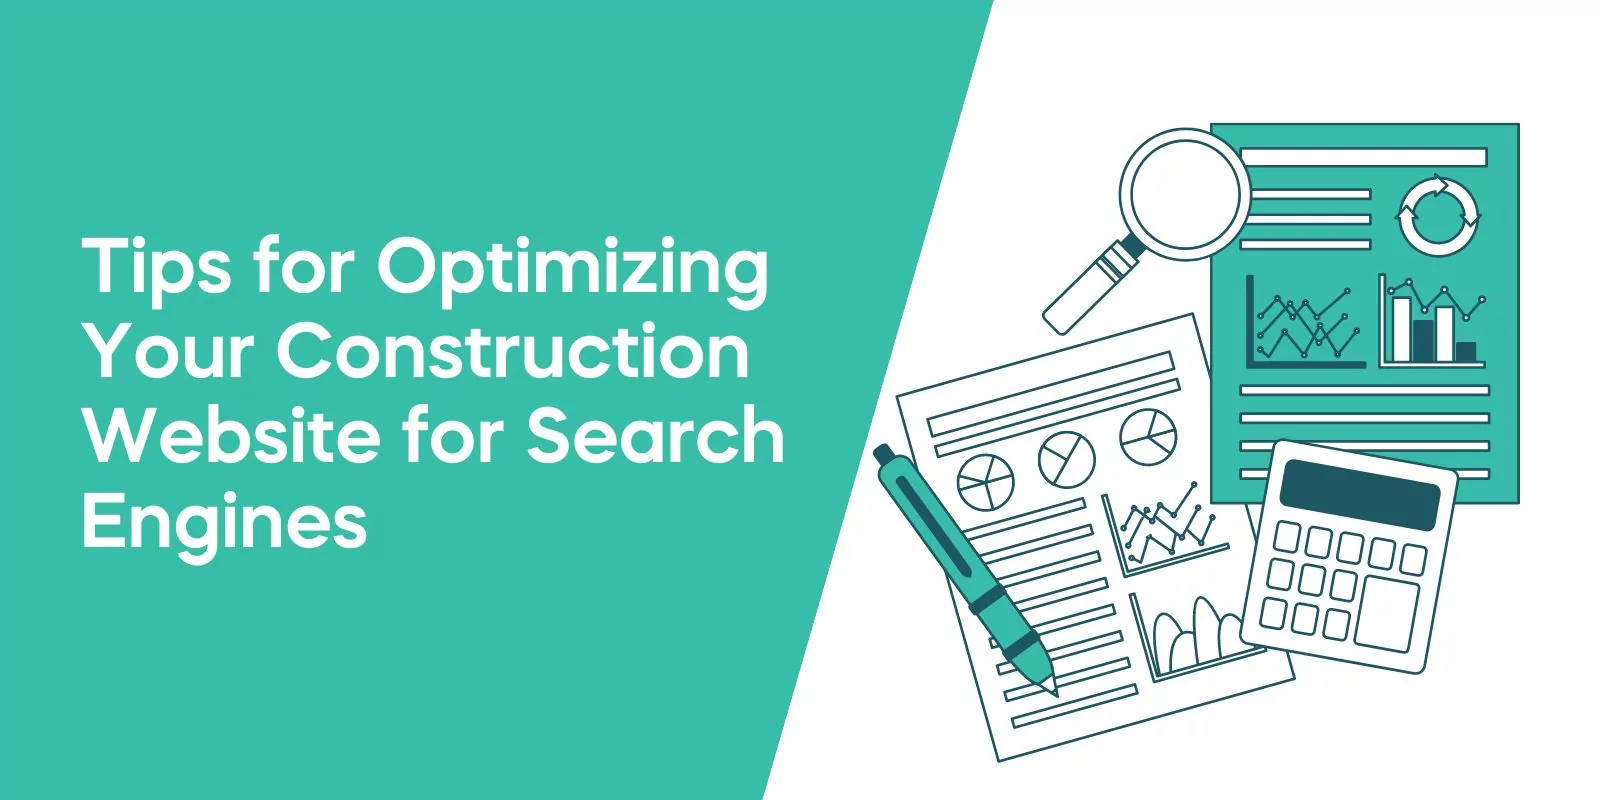 Tips for Optimizing Your Construction Website for Search Engines